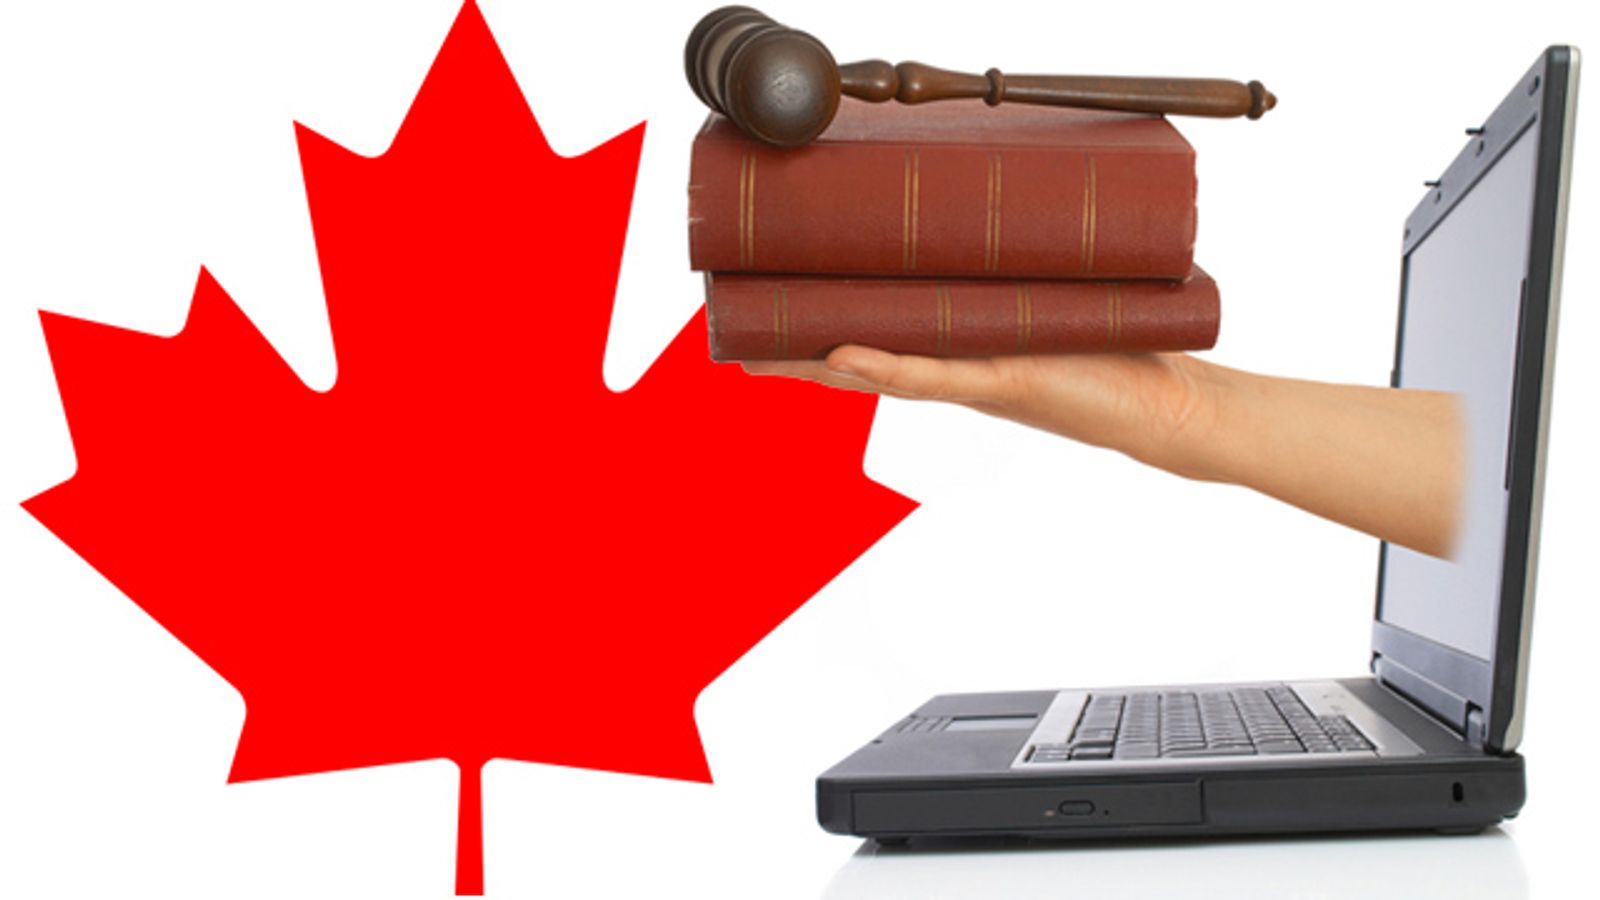 Canadian Legislation Would Force ISPs to Hand Over User Data